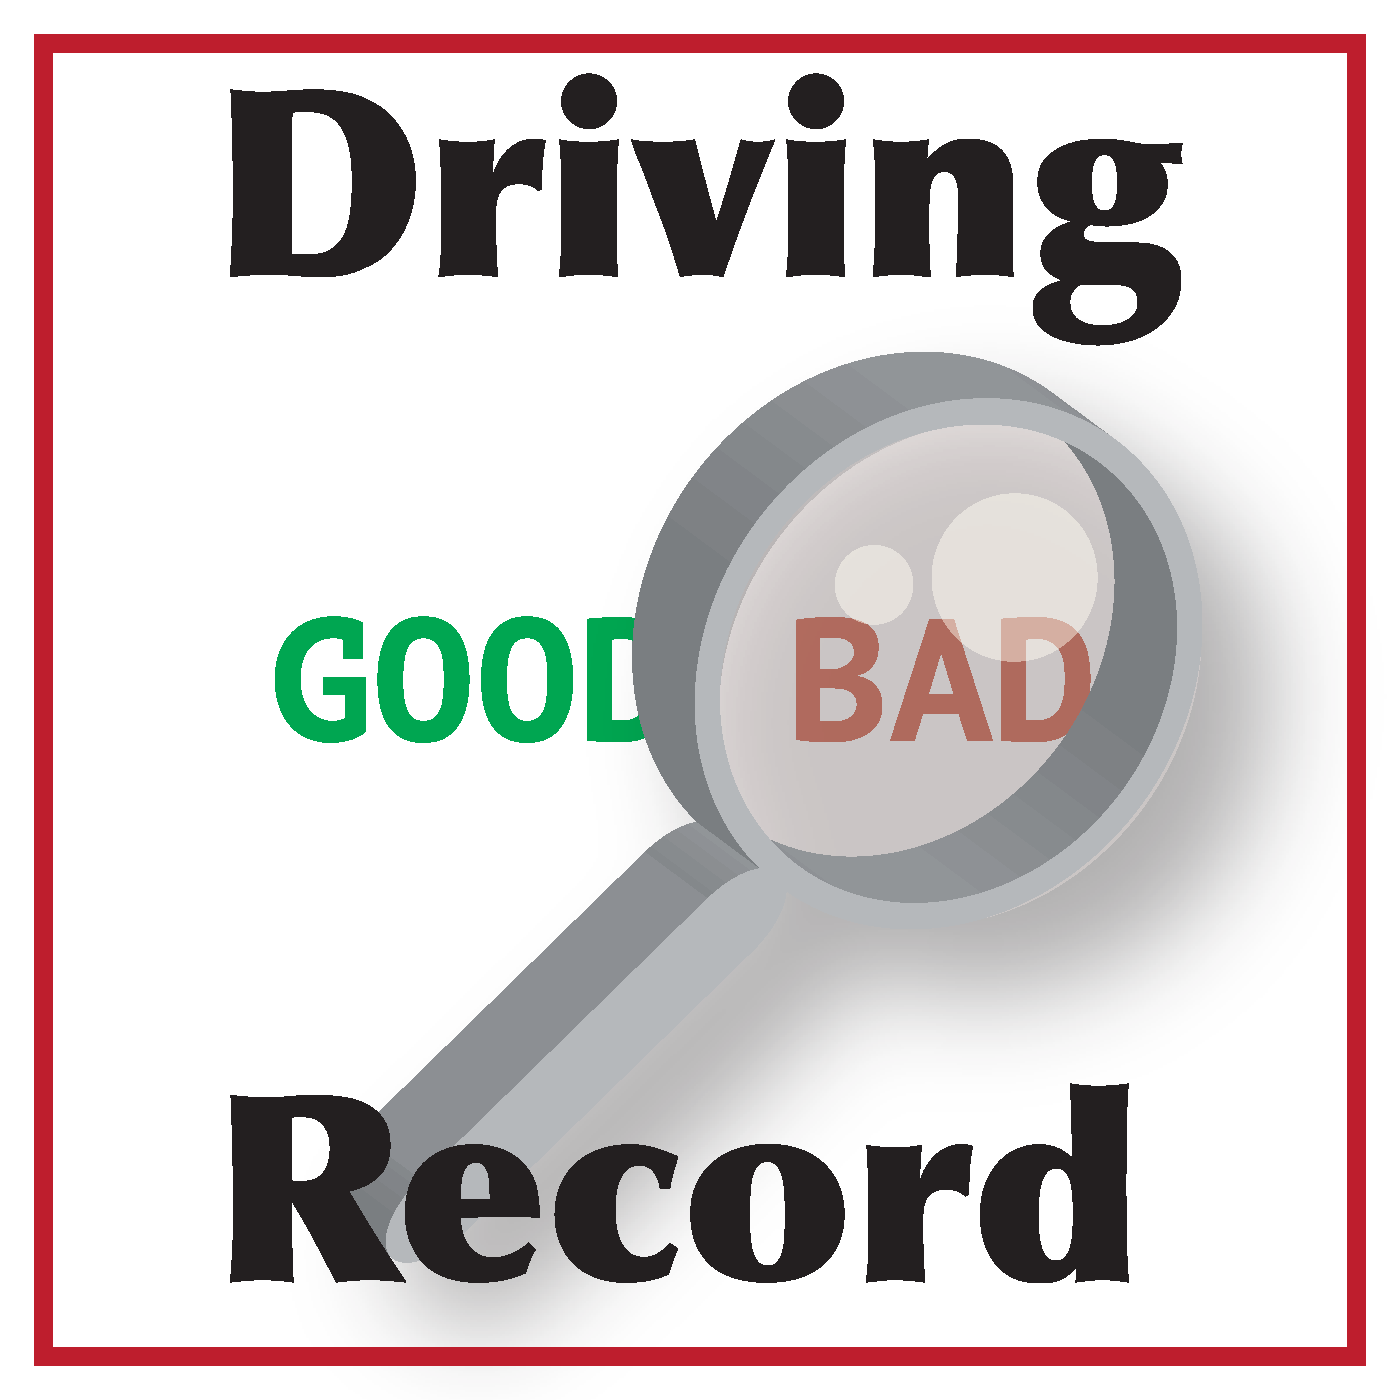 Driving Record